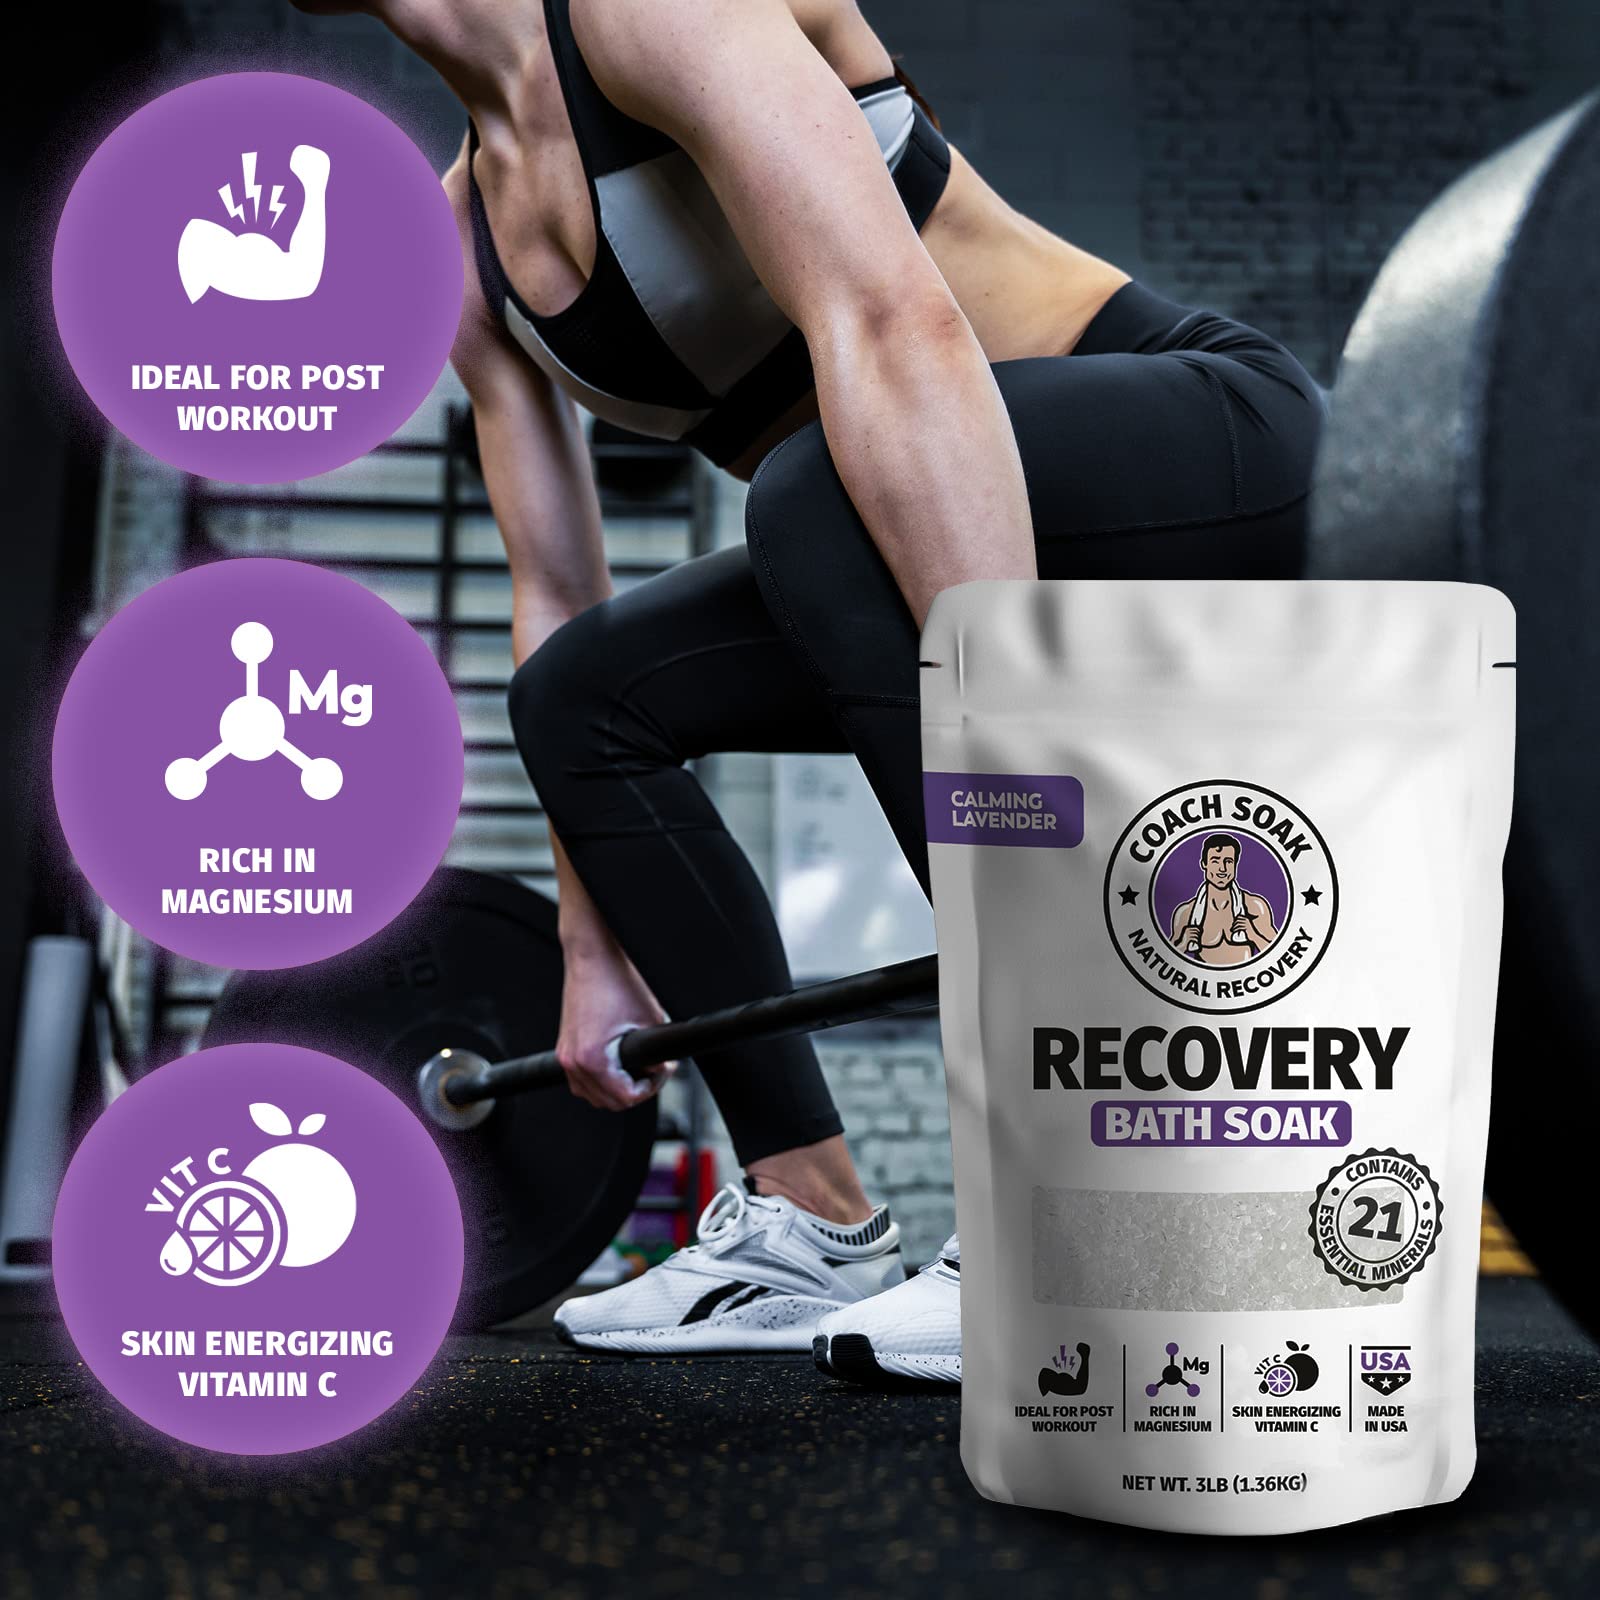 Coach Soak: Recovery Bath Soak - Absorbs Faster Than Epsom Salts for Soaking for Pain – Rejuvenating Post Workout Magnesium Flakes -21 Minerals, Essential Oils & Dead Sea Bath Salts (Calming Lavender)